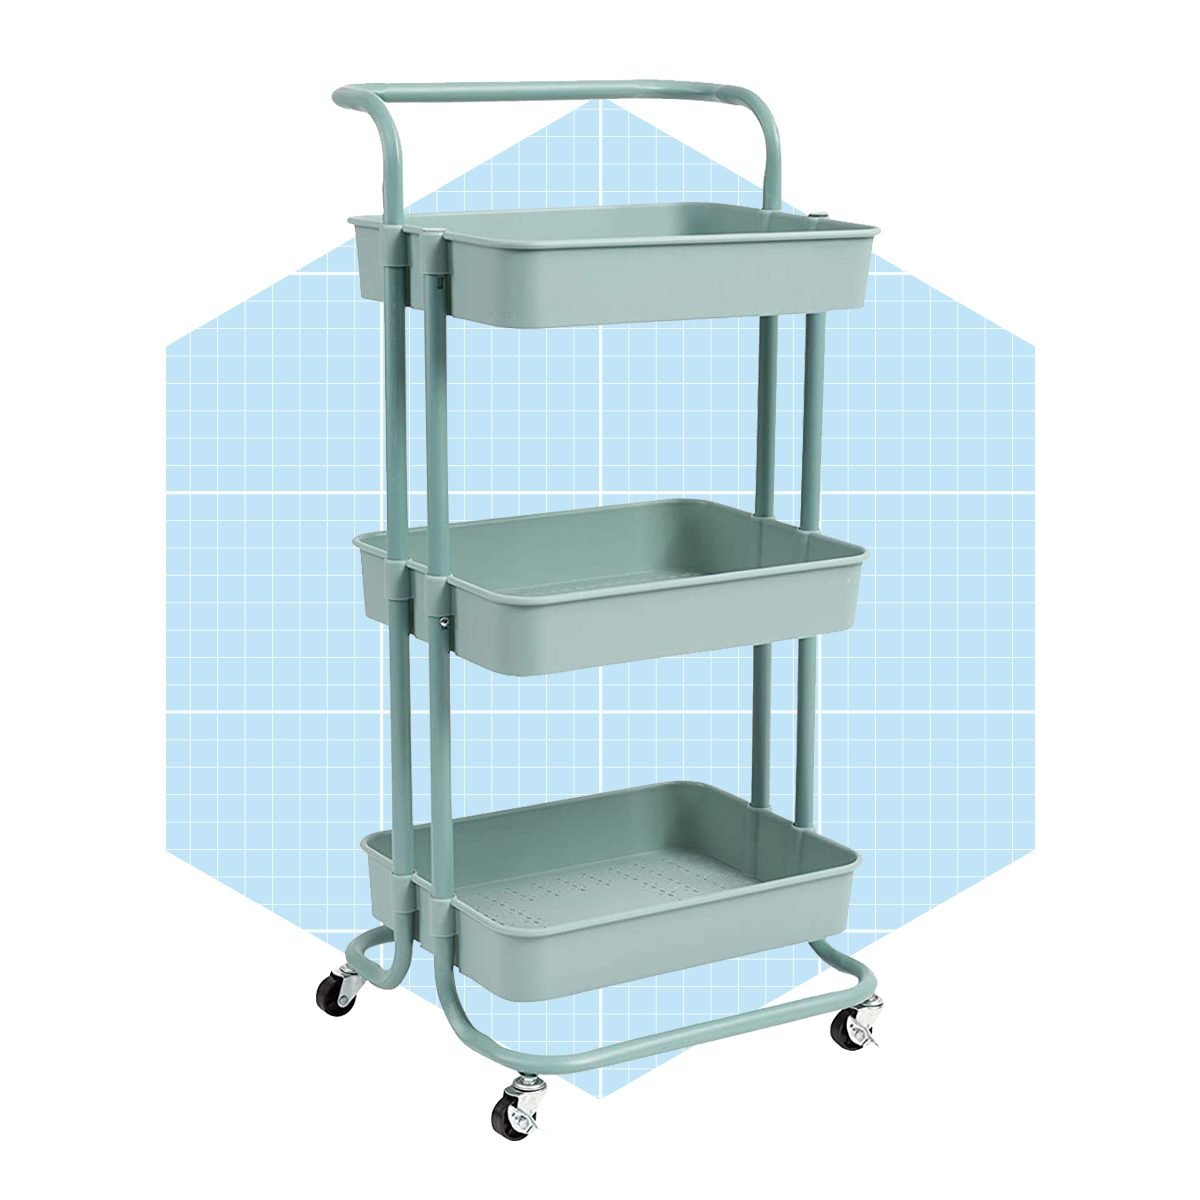 https://www.familyhandyman.com/wp-content/uploads/2021/06/danpinera-3-Tier-Rolling-Utility-Cart-with-Wheels-and-Handle-Storage-Organization-Shelves-for-Kitchen-and-Bathroom-ecomm-amazon.com_.jpg?fit=700%2C700